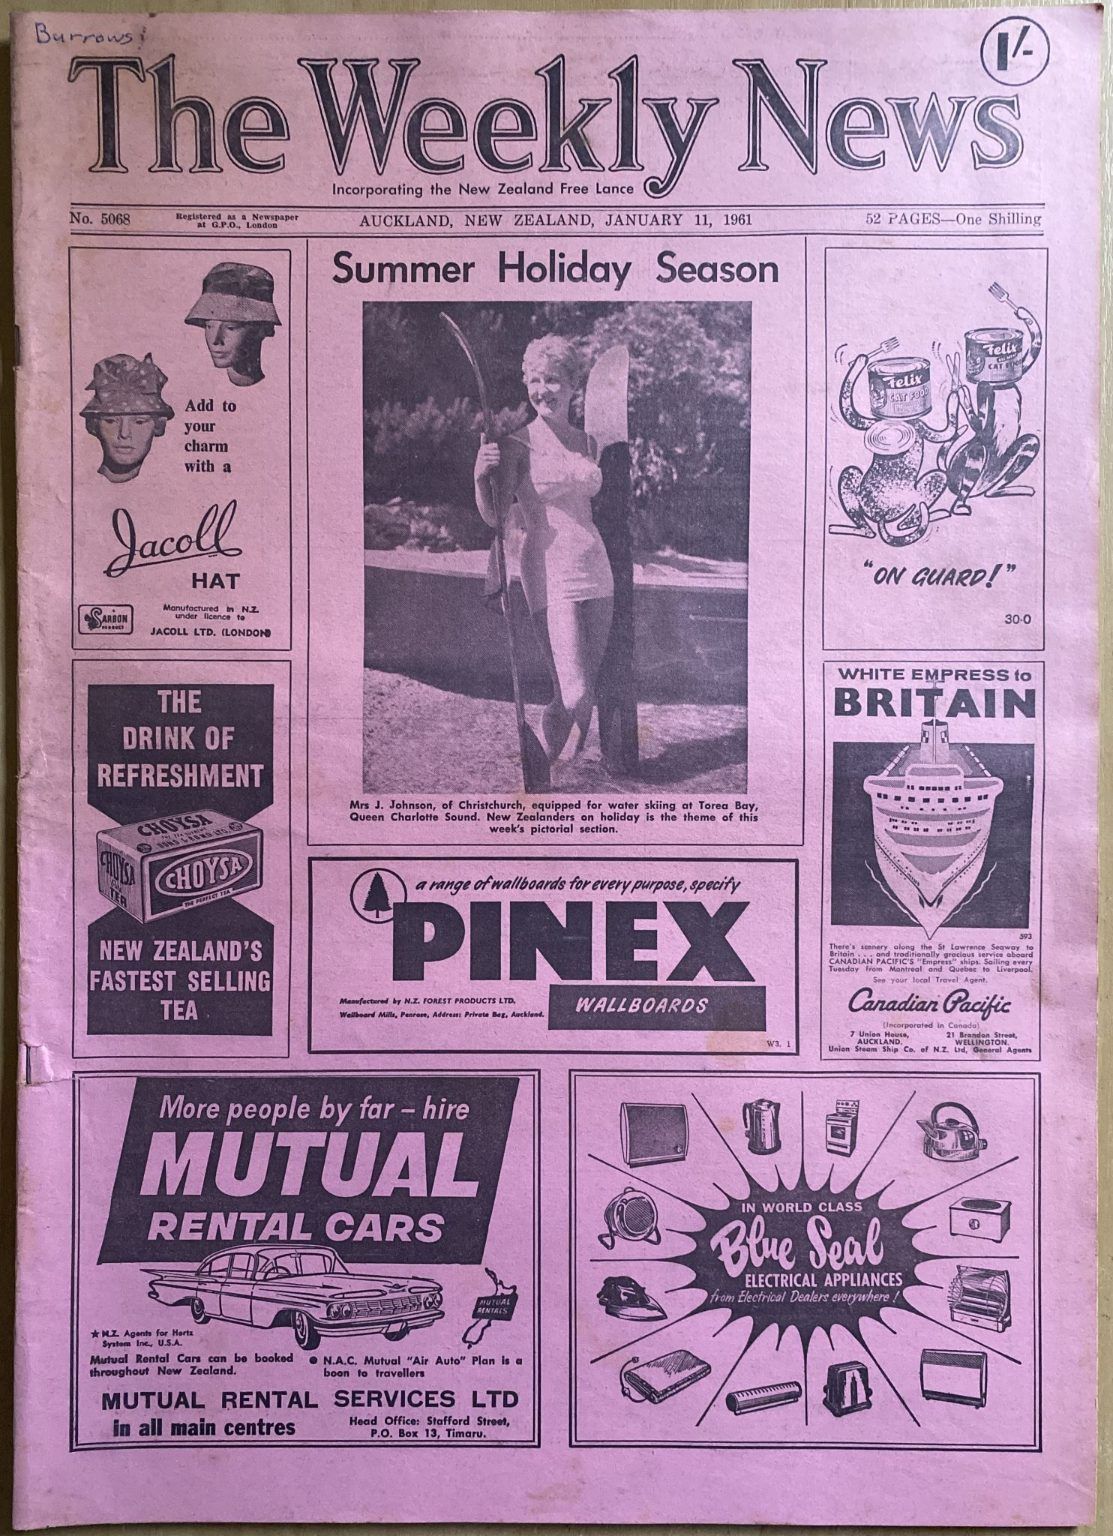 OLD NEWSPAPER: The Weekly News, No. 5068, 11 January 1961